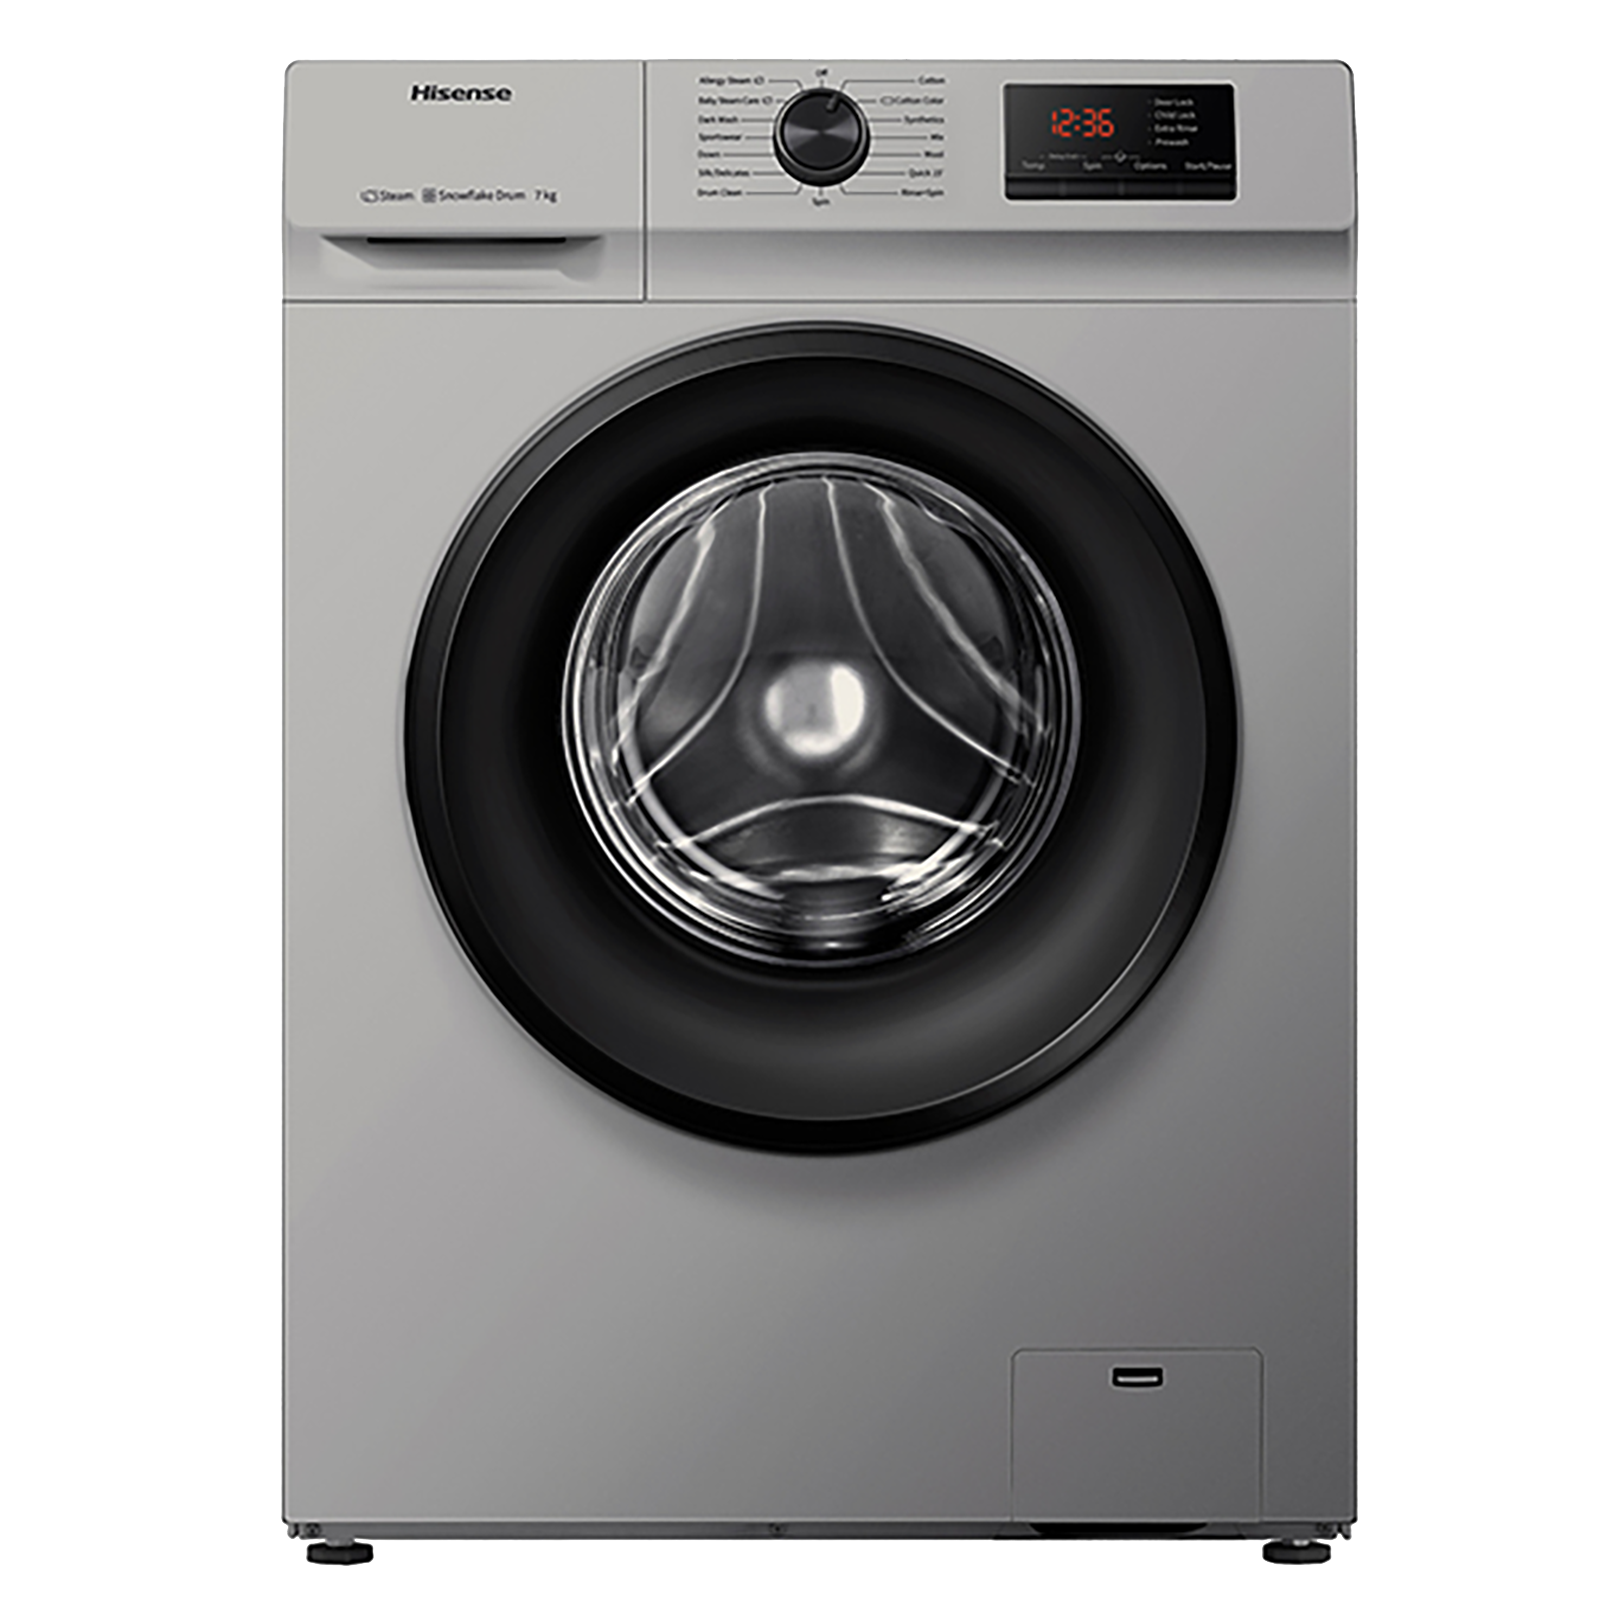 Hisense Simple Life 7 Kg Fully Automatic Front Load Washing Machine (Automatic Fault Finder, WFVB7012MS, Silver)_1